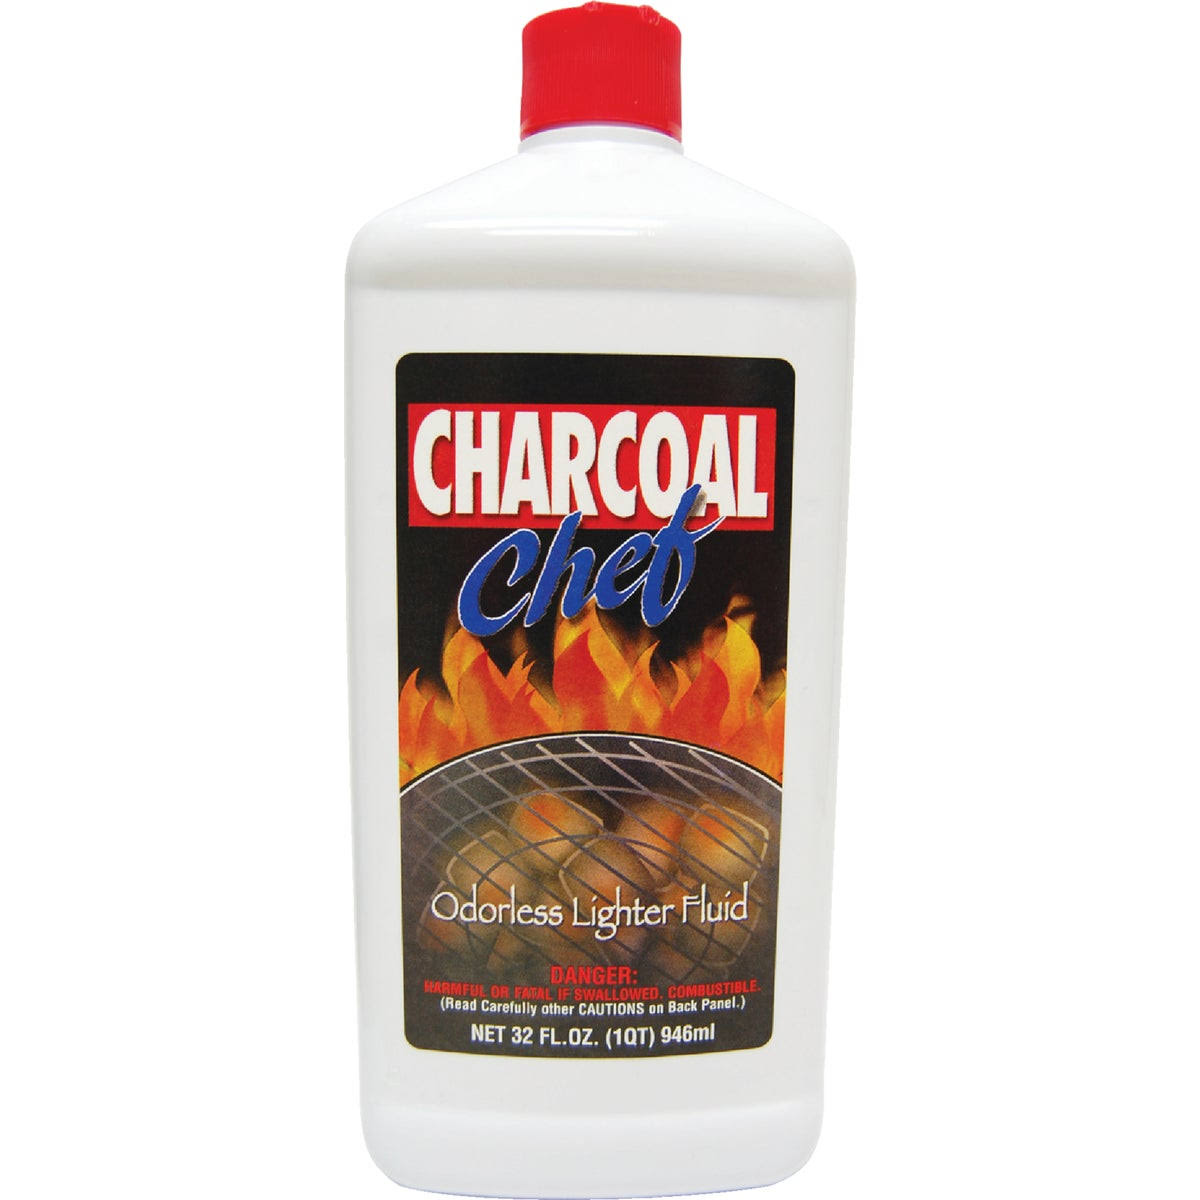 Charcoal Chef Lighter Fluid